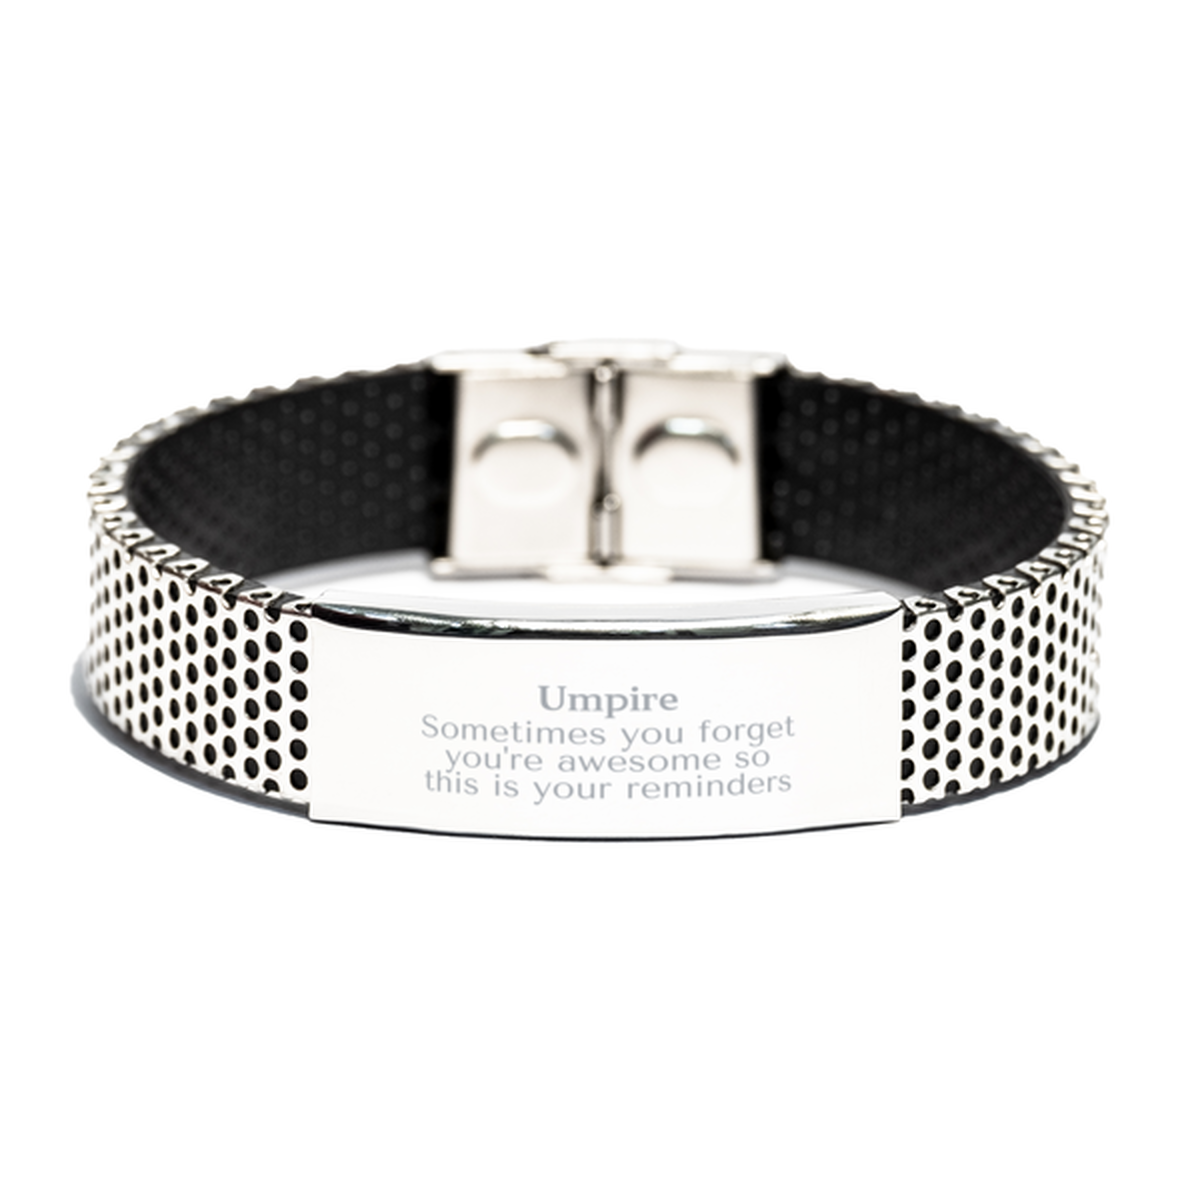 Sentimental Umpire Stainless Steel Bracelet, Umpire Sometimes you forget you're awesome so this is your reminders, Graduation Christmas Birthday Gifts for Umpire, Men, Women, Coworkers